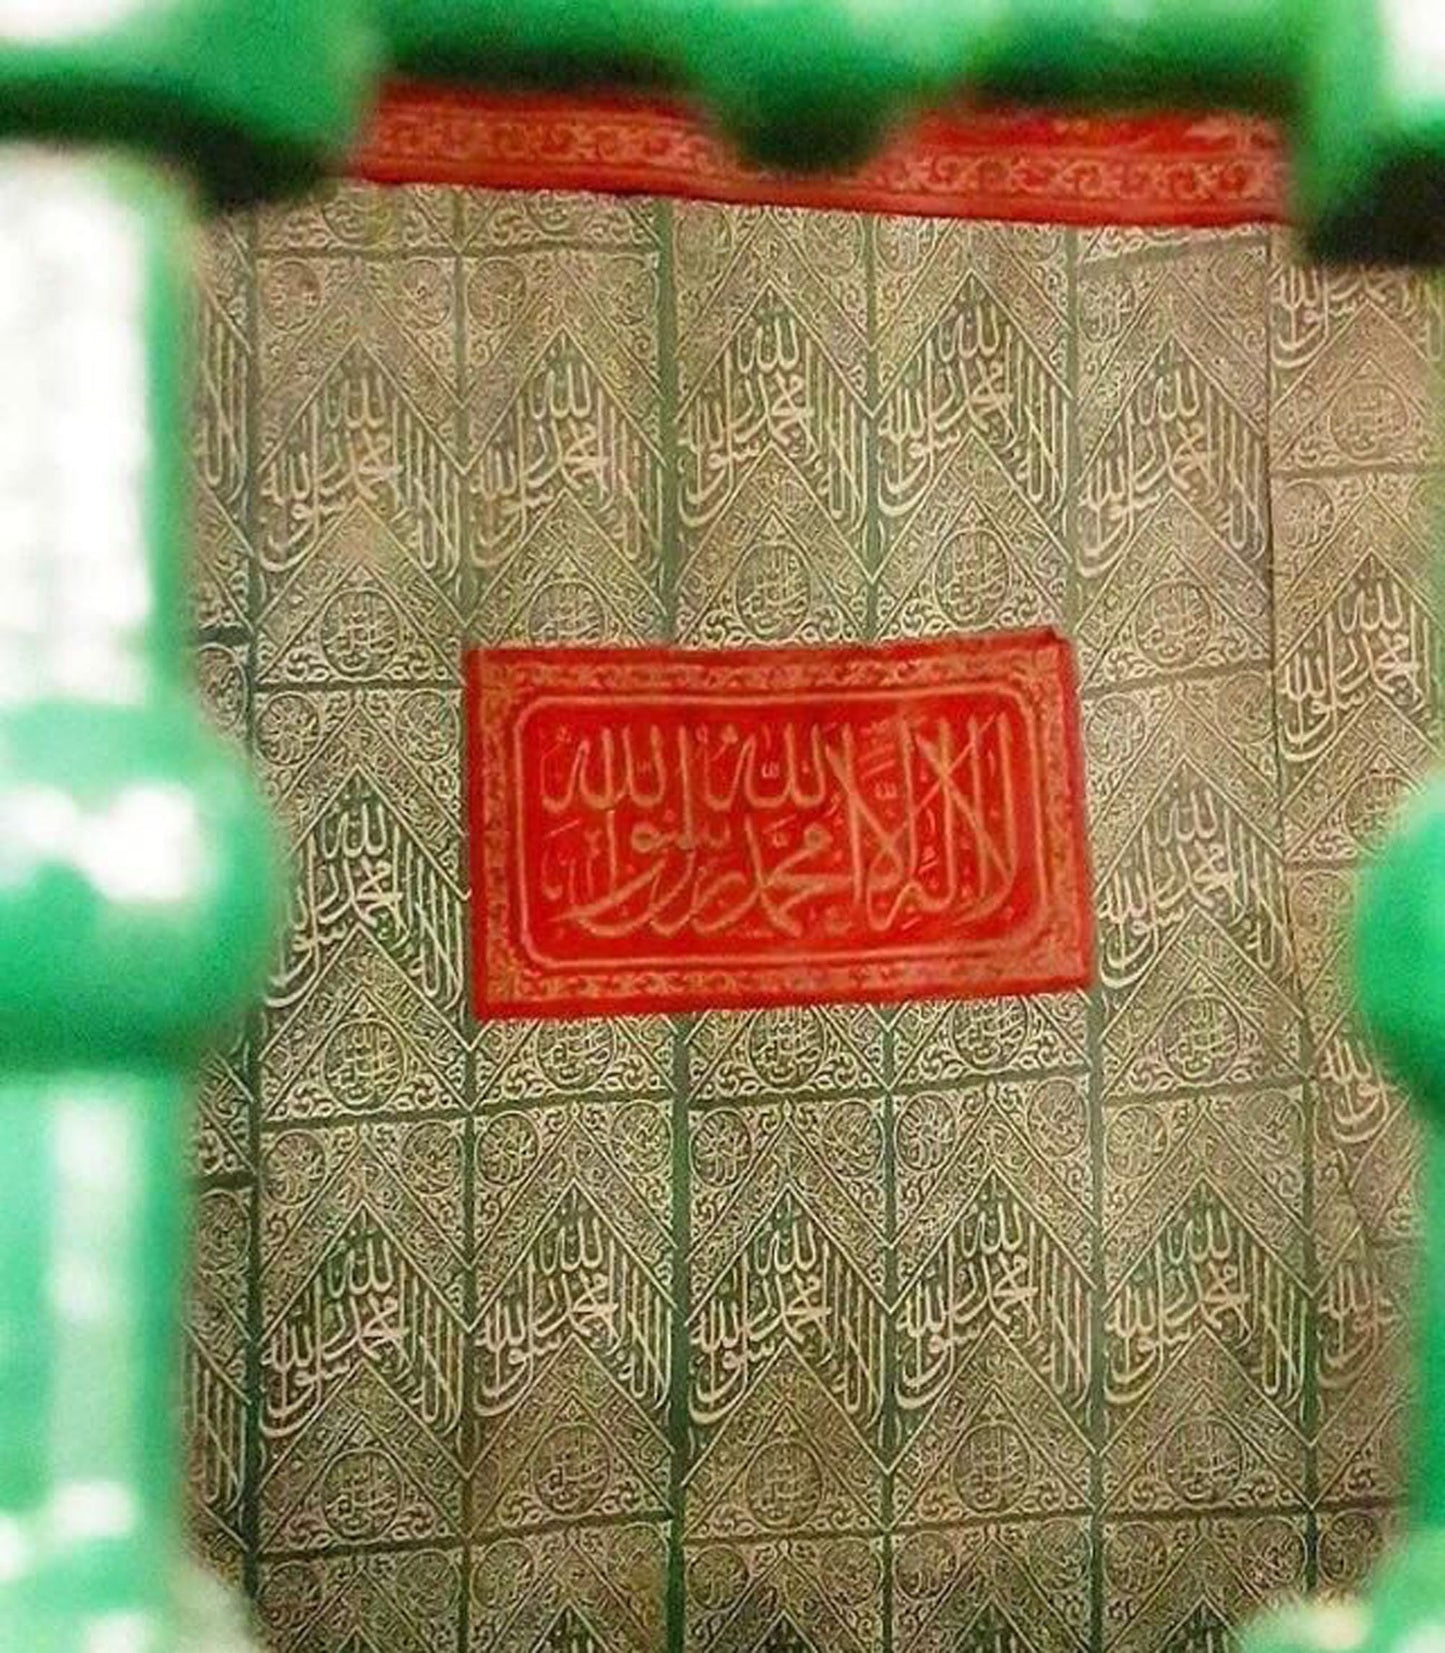 Piece of cover cloth of Muhammad PBUH chamber and kiswa of blessed holy kaabah